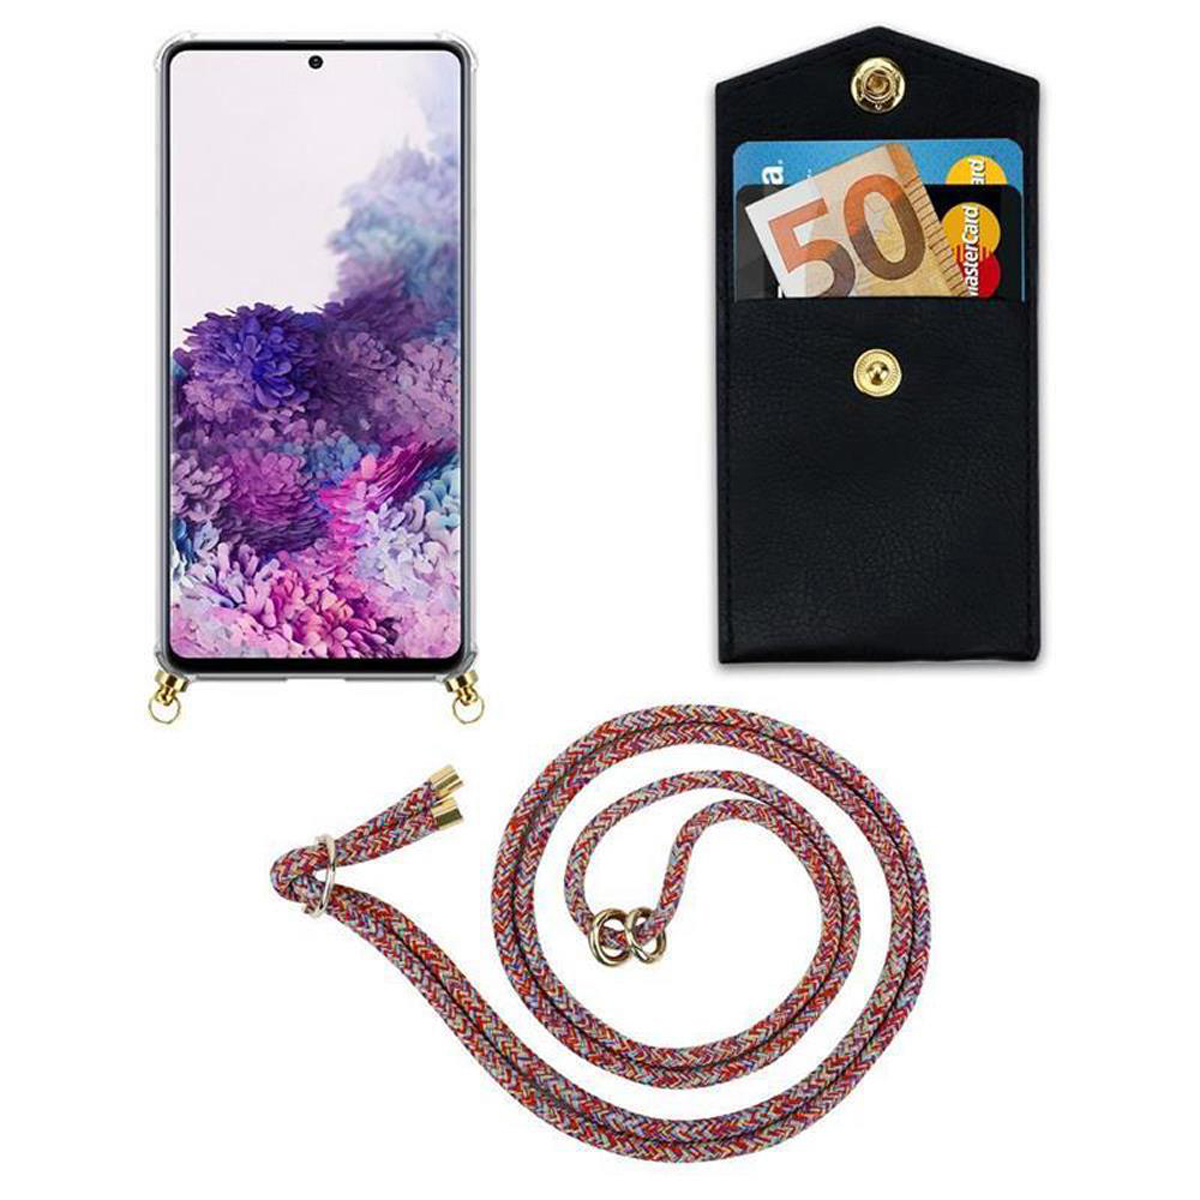 Hülle, 4G, und mit COLORFUL Backcover, Band Samsung, abnehmbarer Kordel CADORABO Gold A71 Galaxy PARROT Handy Ringen, Kette